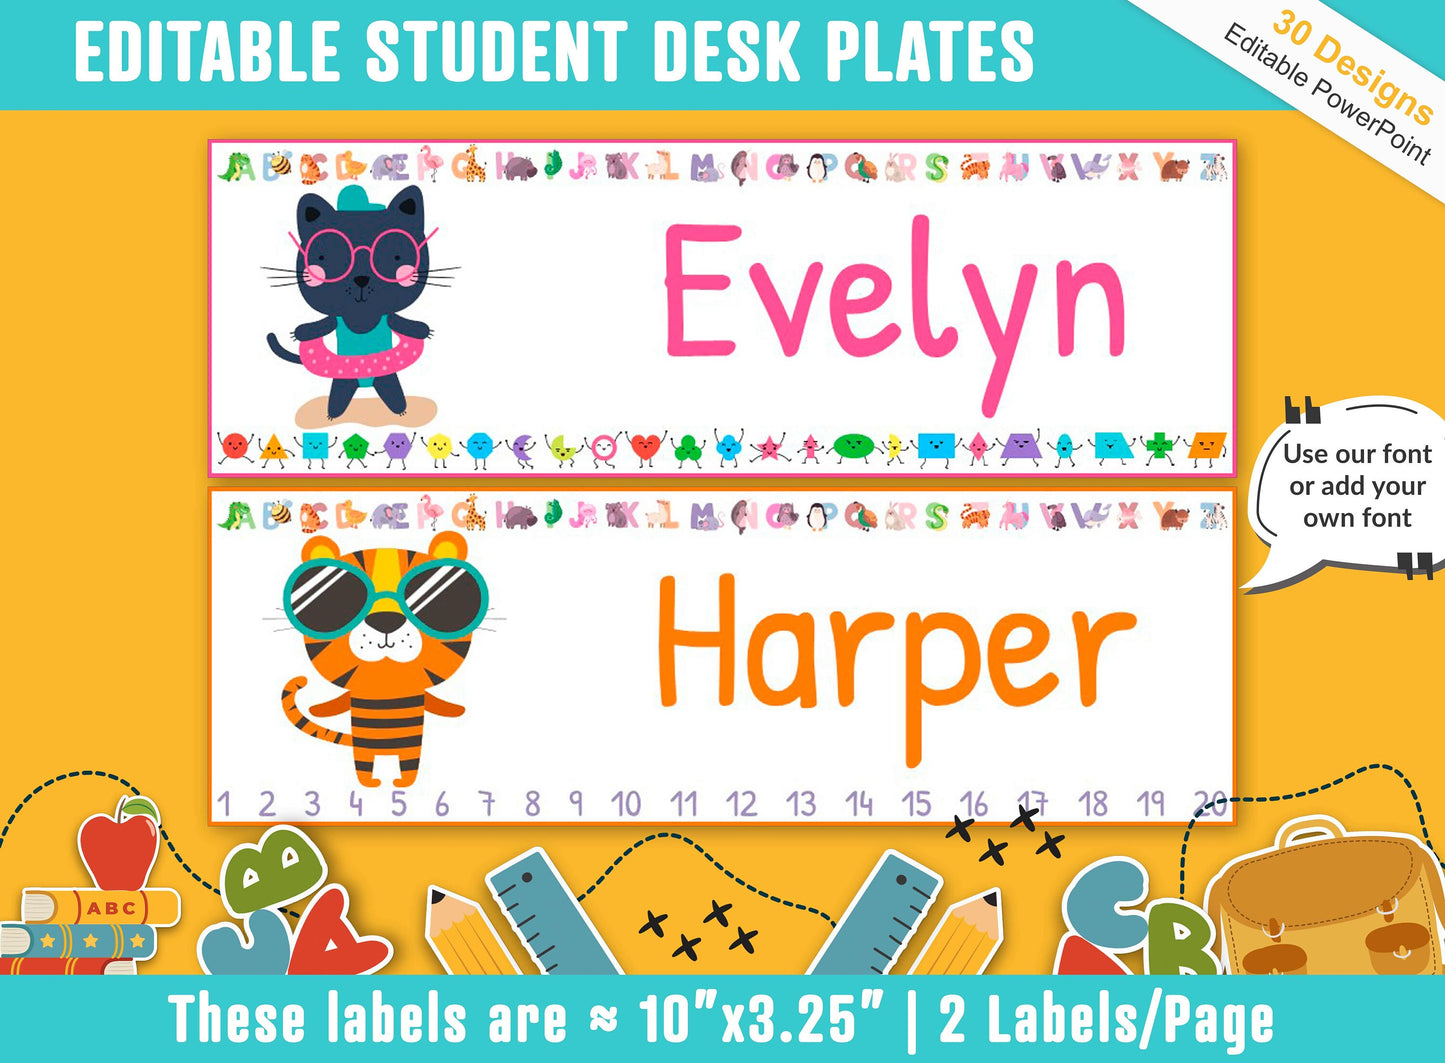 Student Desk Plates, 30 Printable/Editable Cute and Funny Animal Classroom Name Tags & Name Plates, a Helpful Addition to Your Classroom